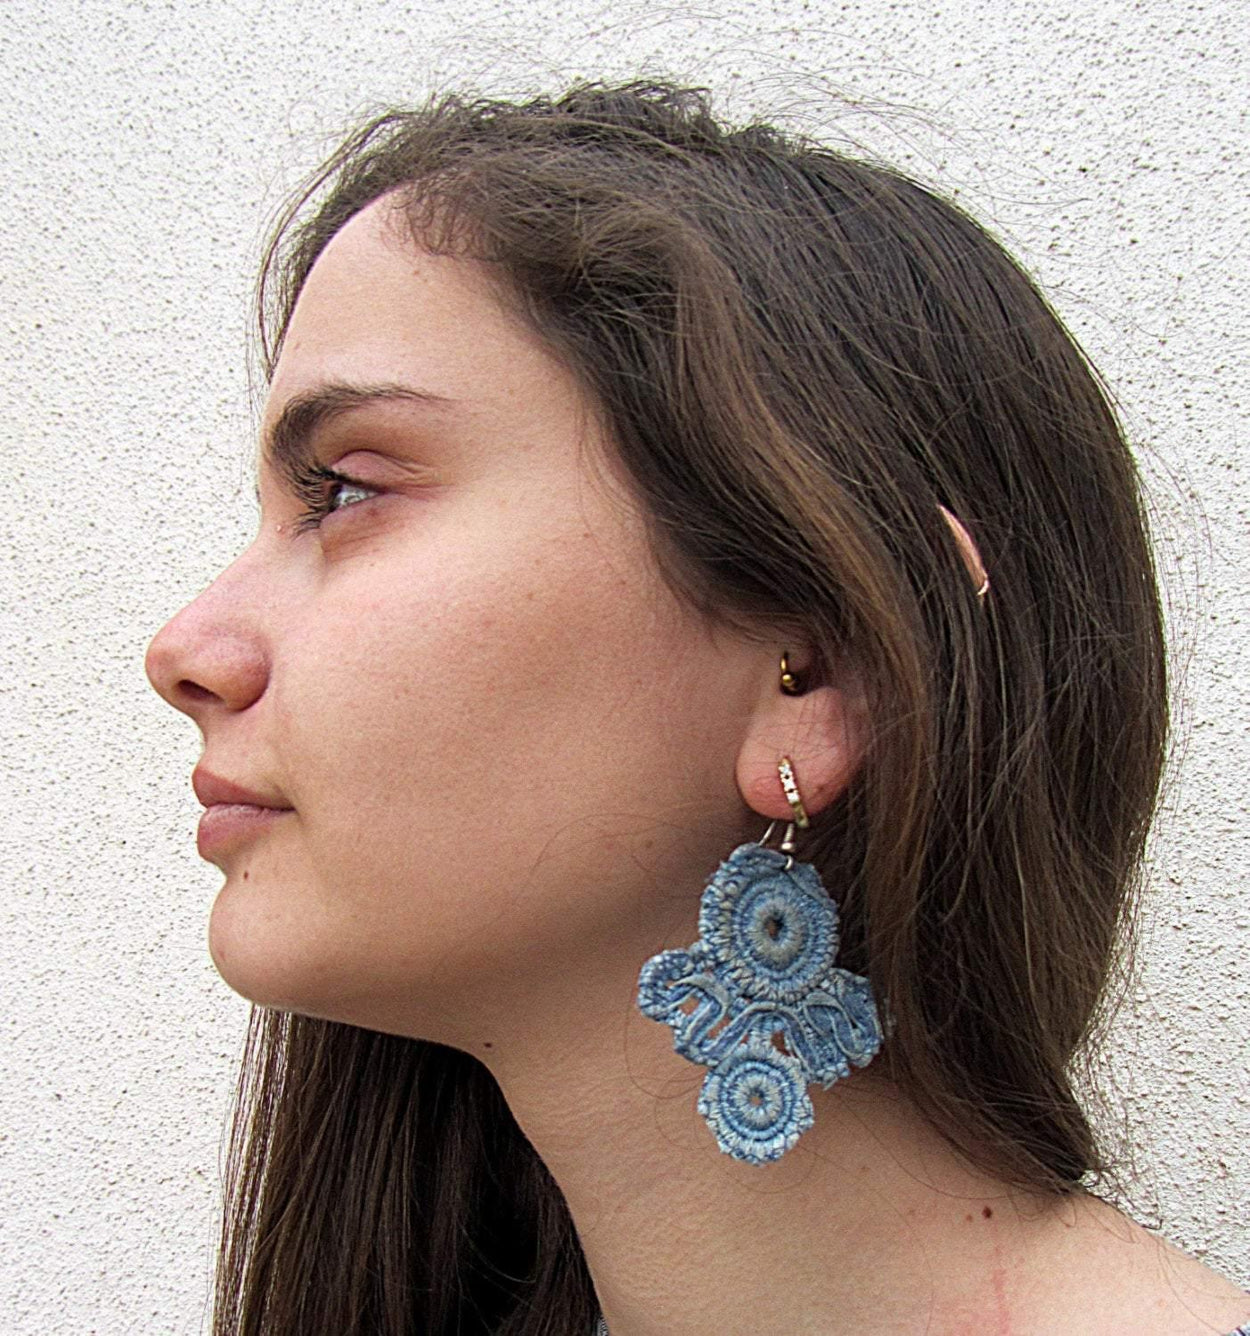 The lightest earrings lace denim with special impregnation for hardness, strength and for repulsion pollution. - GLEZANT designer goods store. 